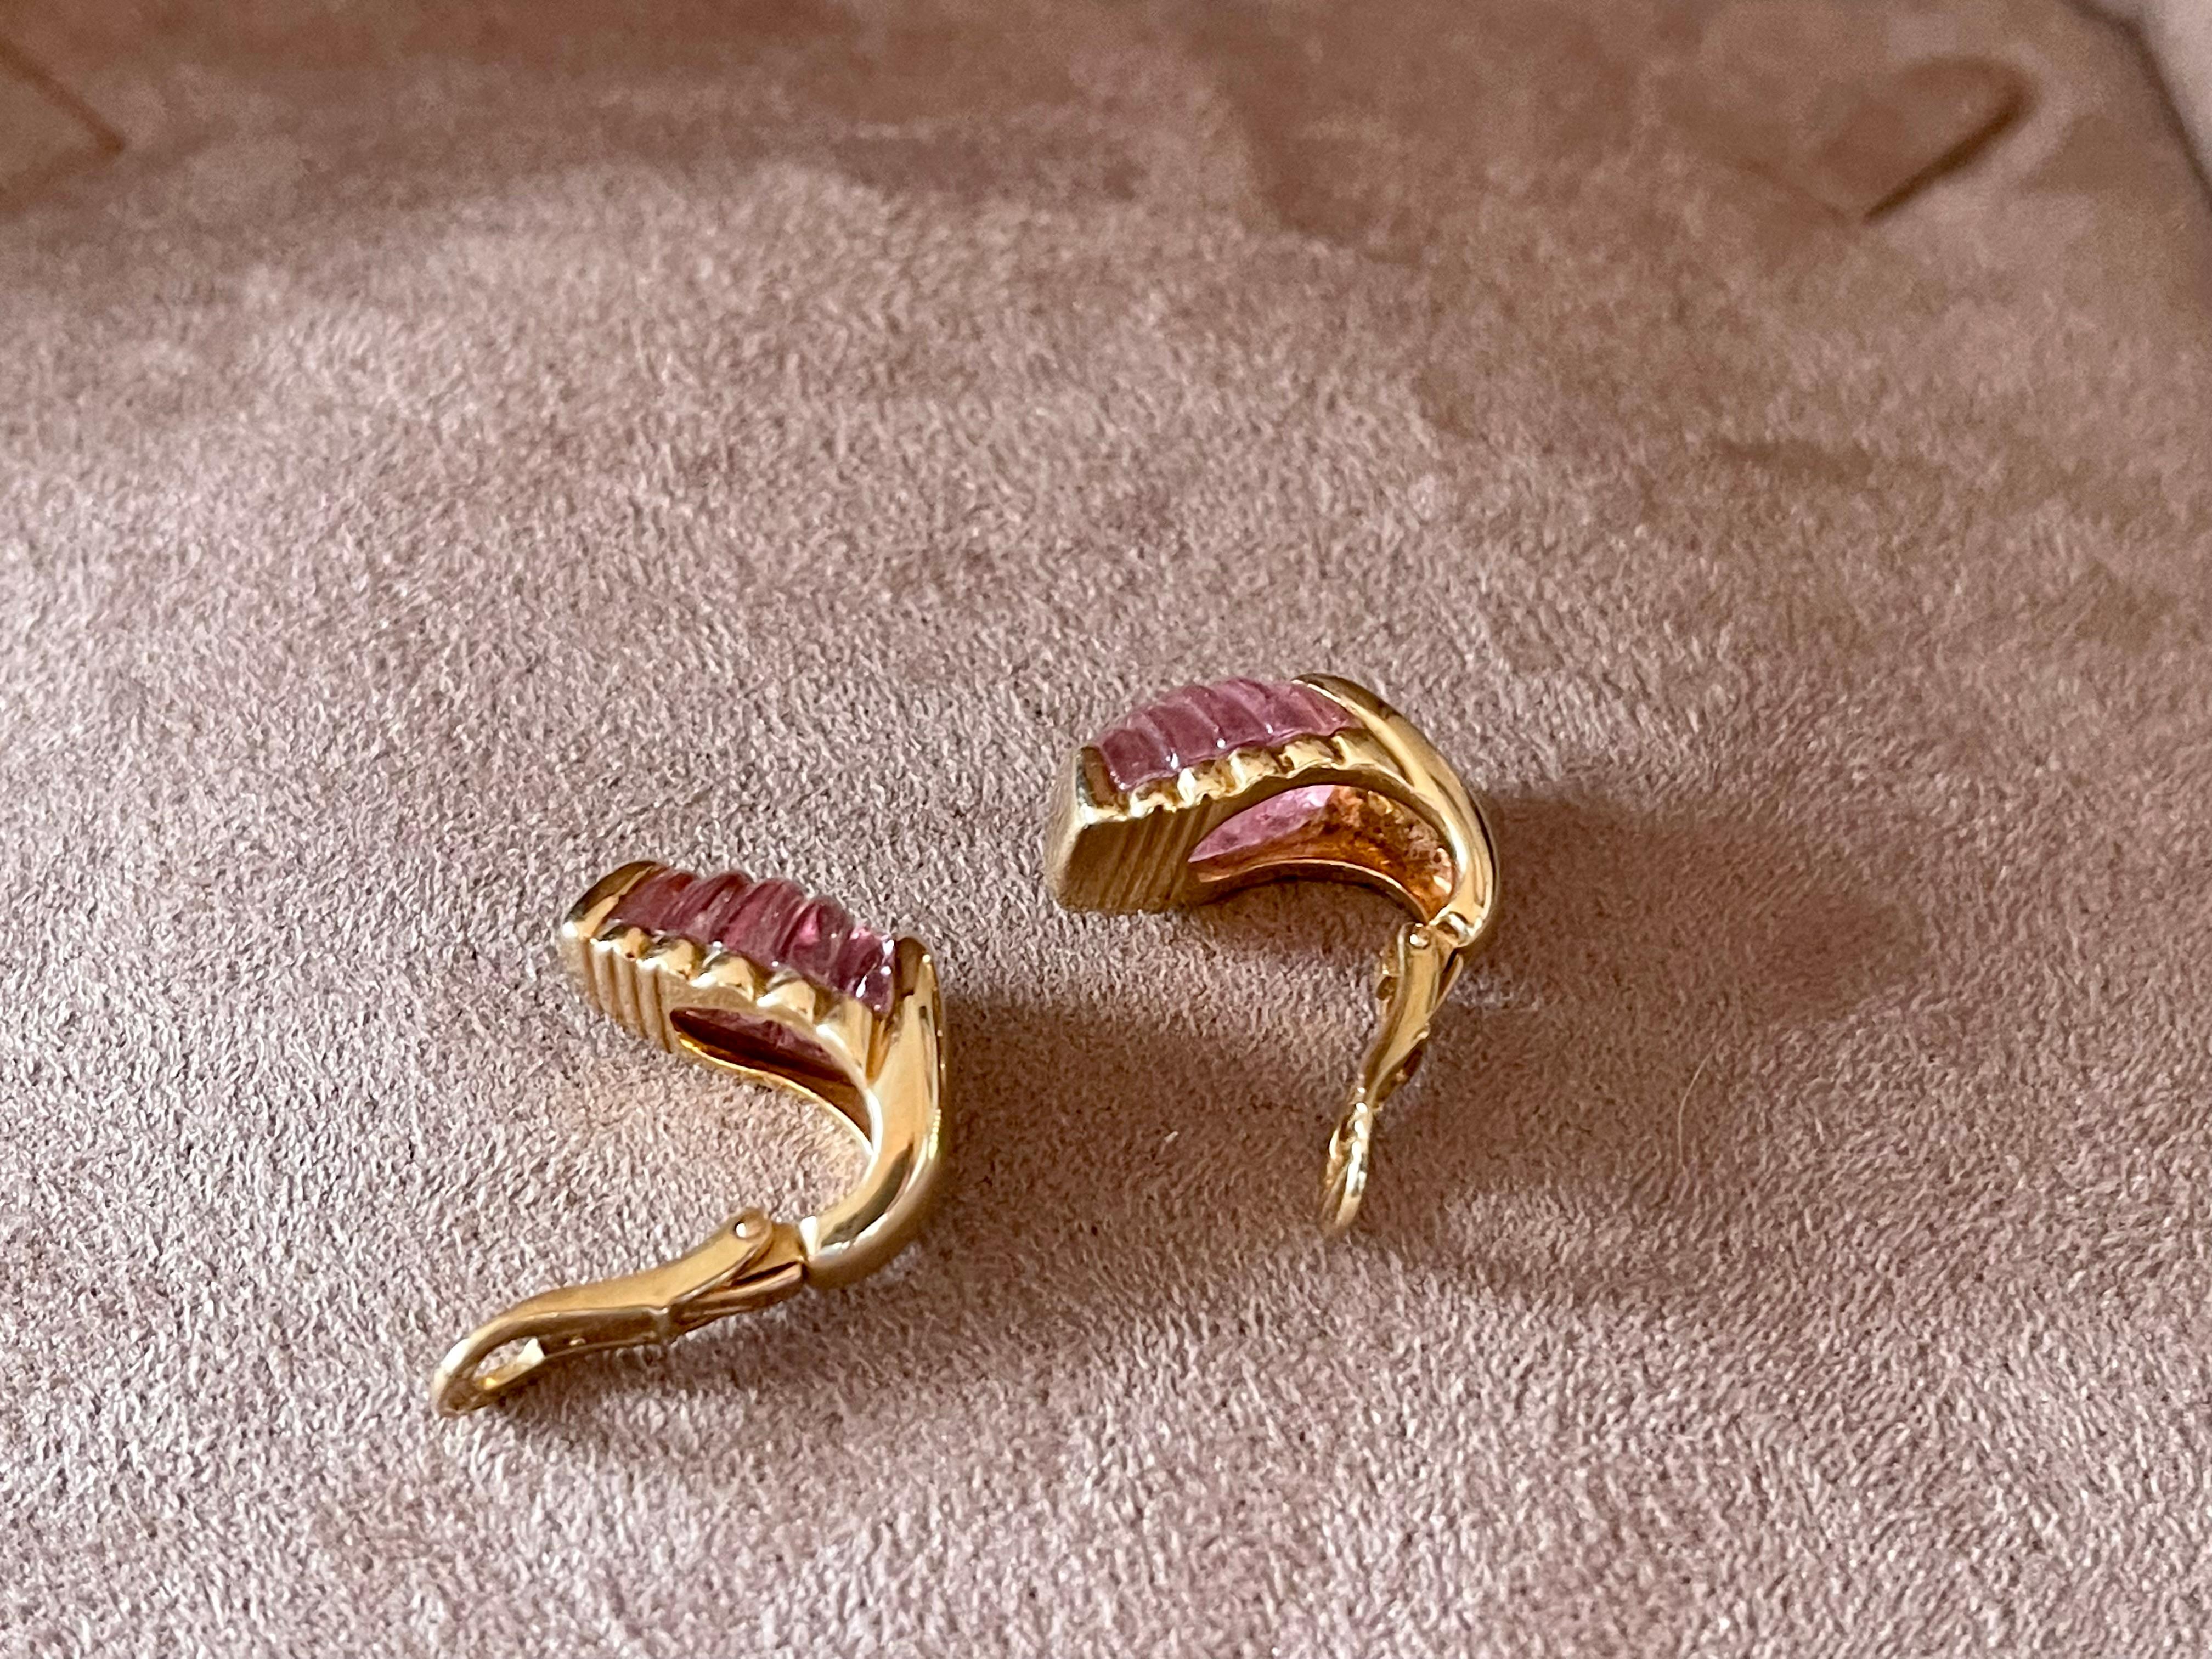 Cabochon Vintage 18 K yellow Gold earclips with engraved pink Tourmaline by Bulgari